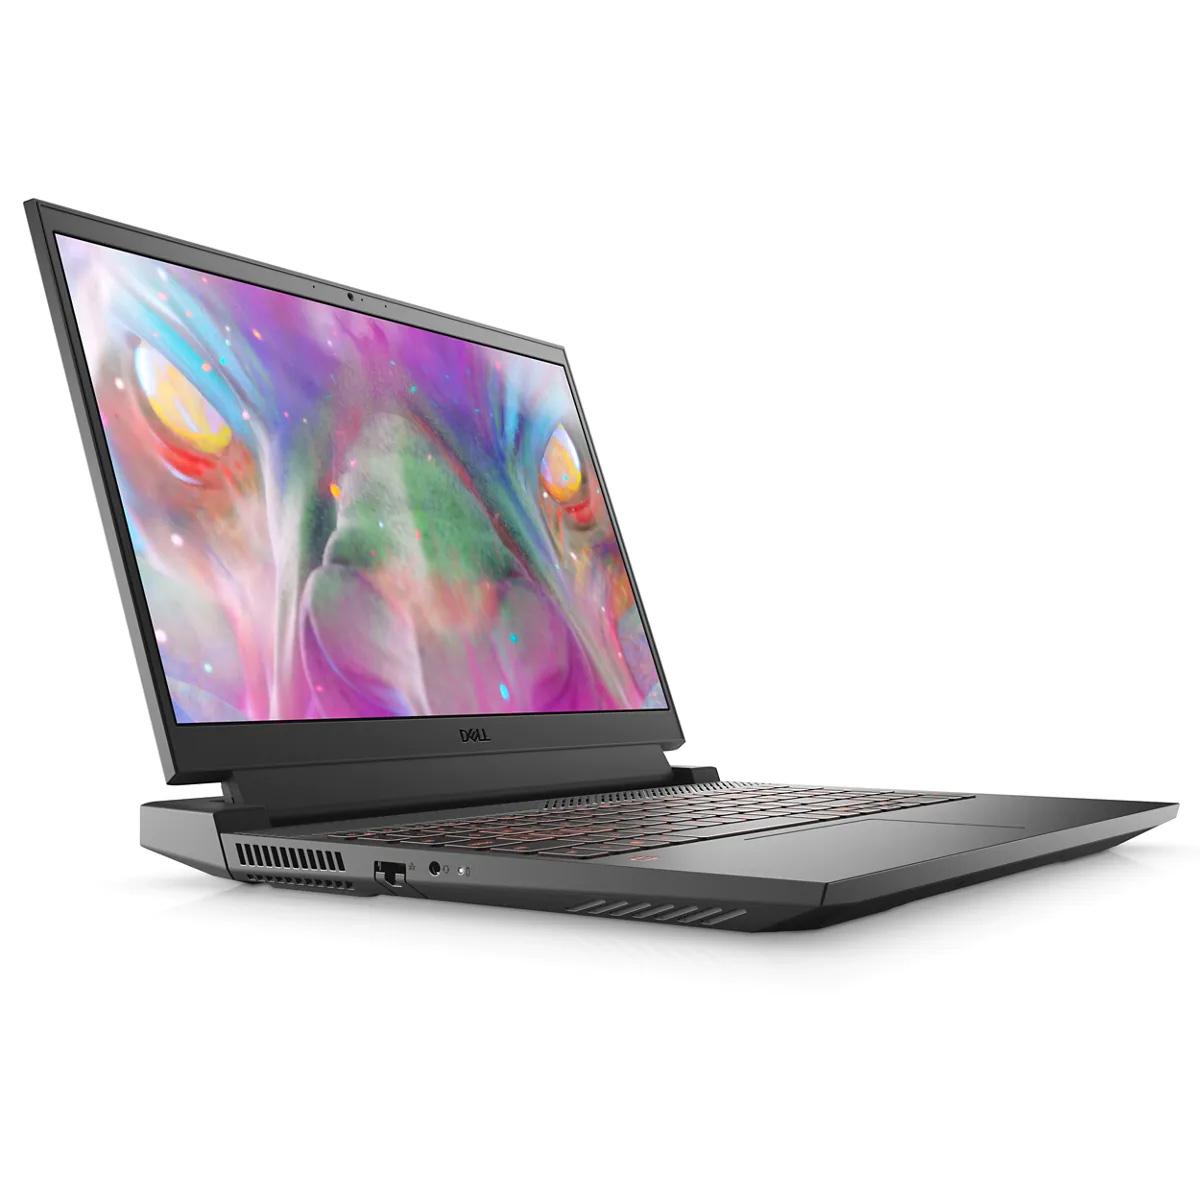 Dell G15 15.6in i7 16GB 512GB Gaming Laptop Notebook for $1199.99 Shipped